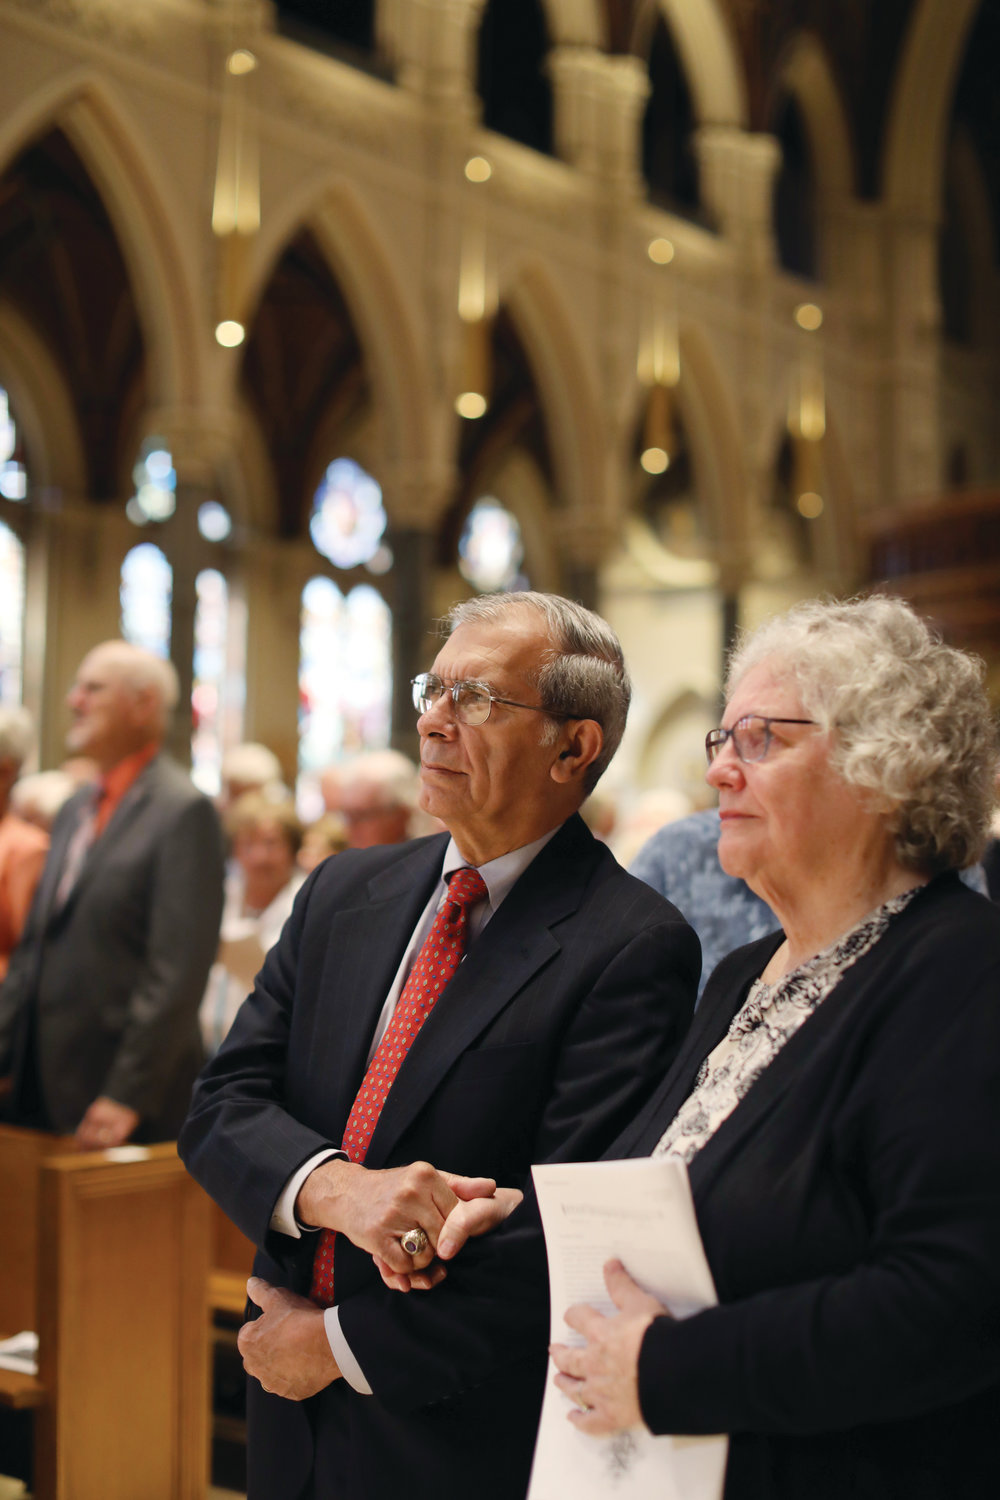 Hundreds of couples gathered on Sunday, Sept. 15 at the Cathedral of SS. Peter and Paul to renew their wedding vows.